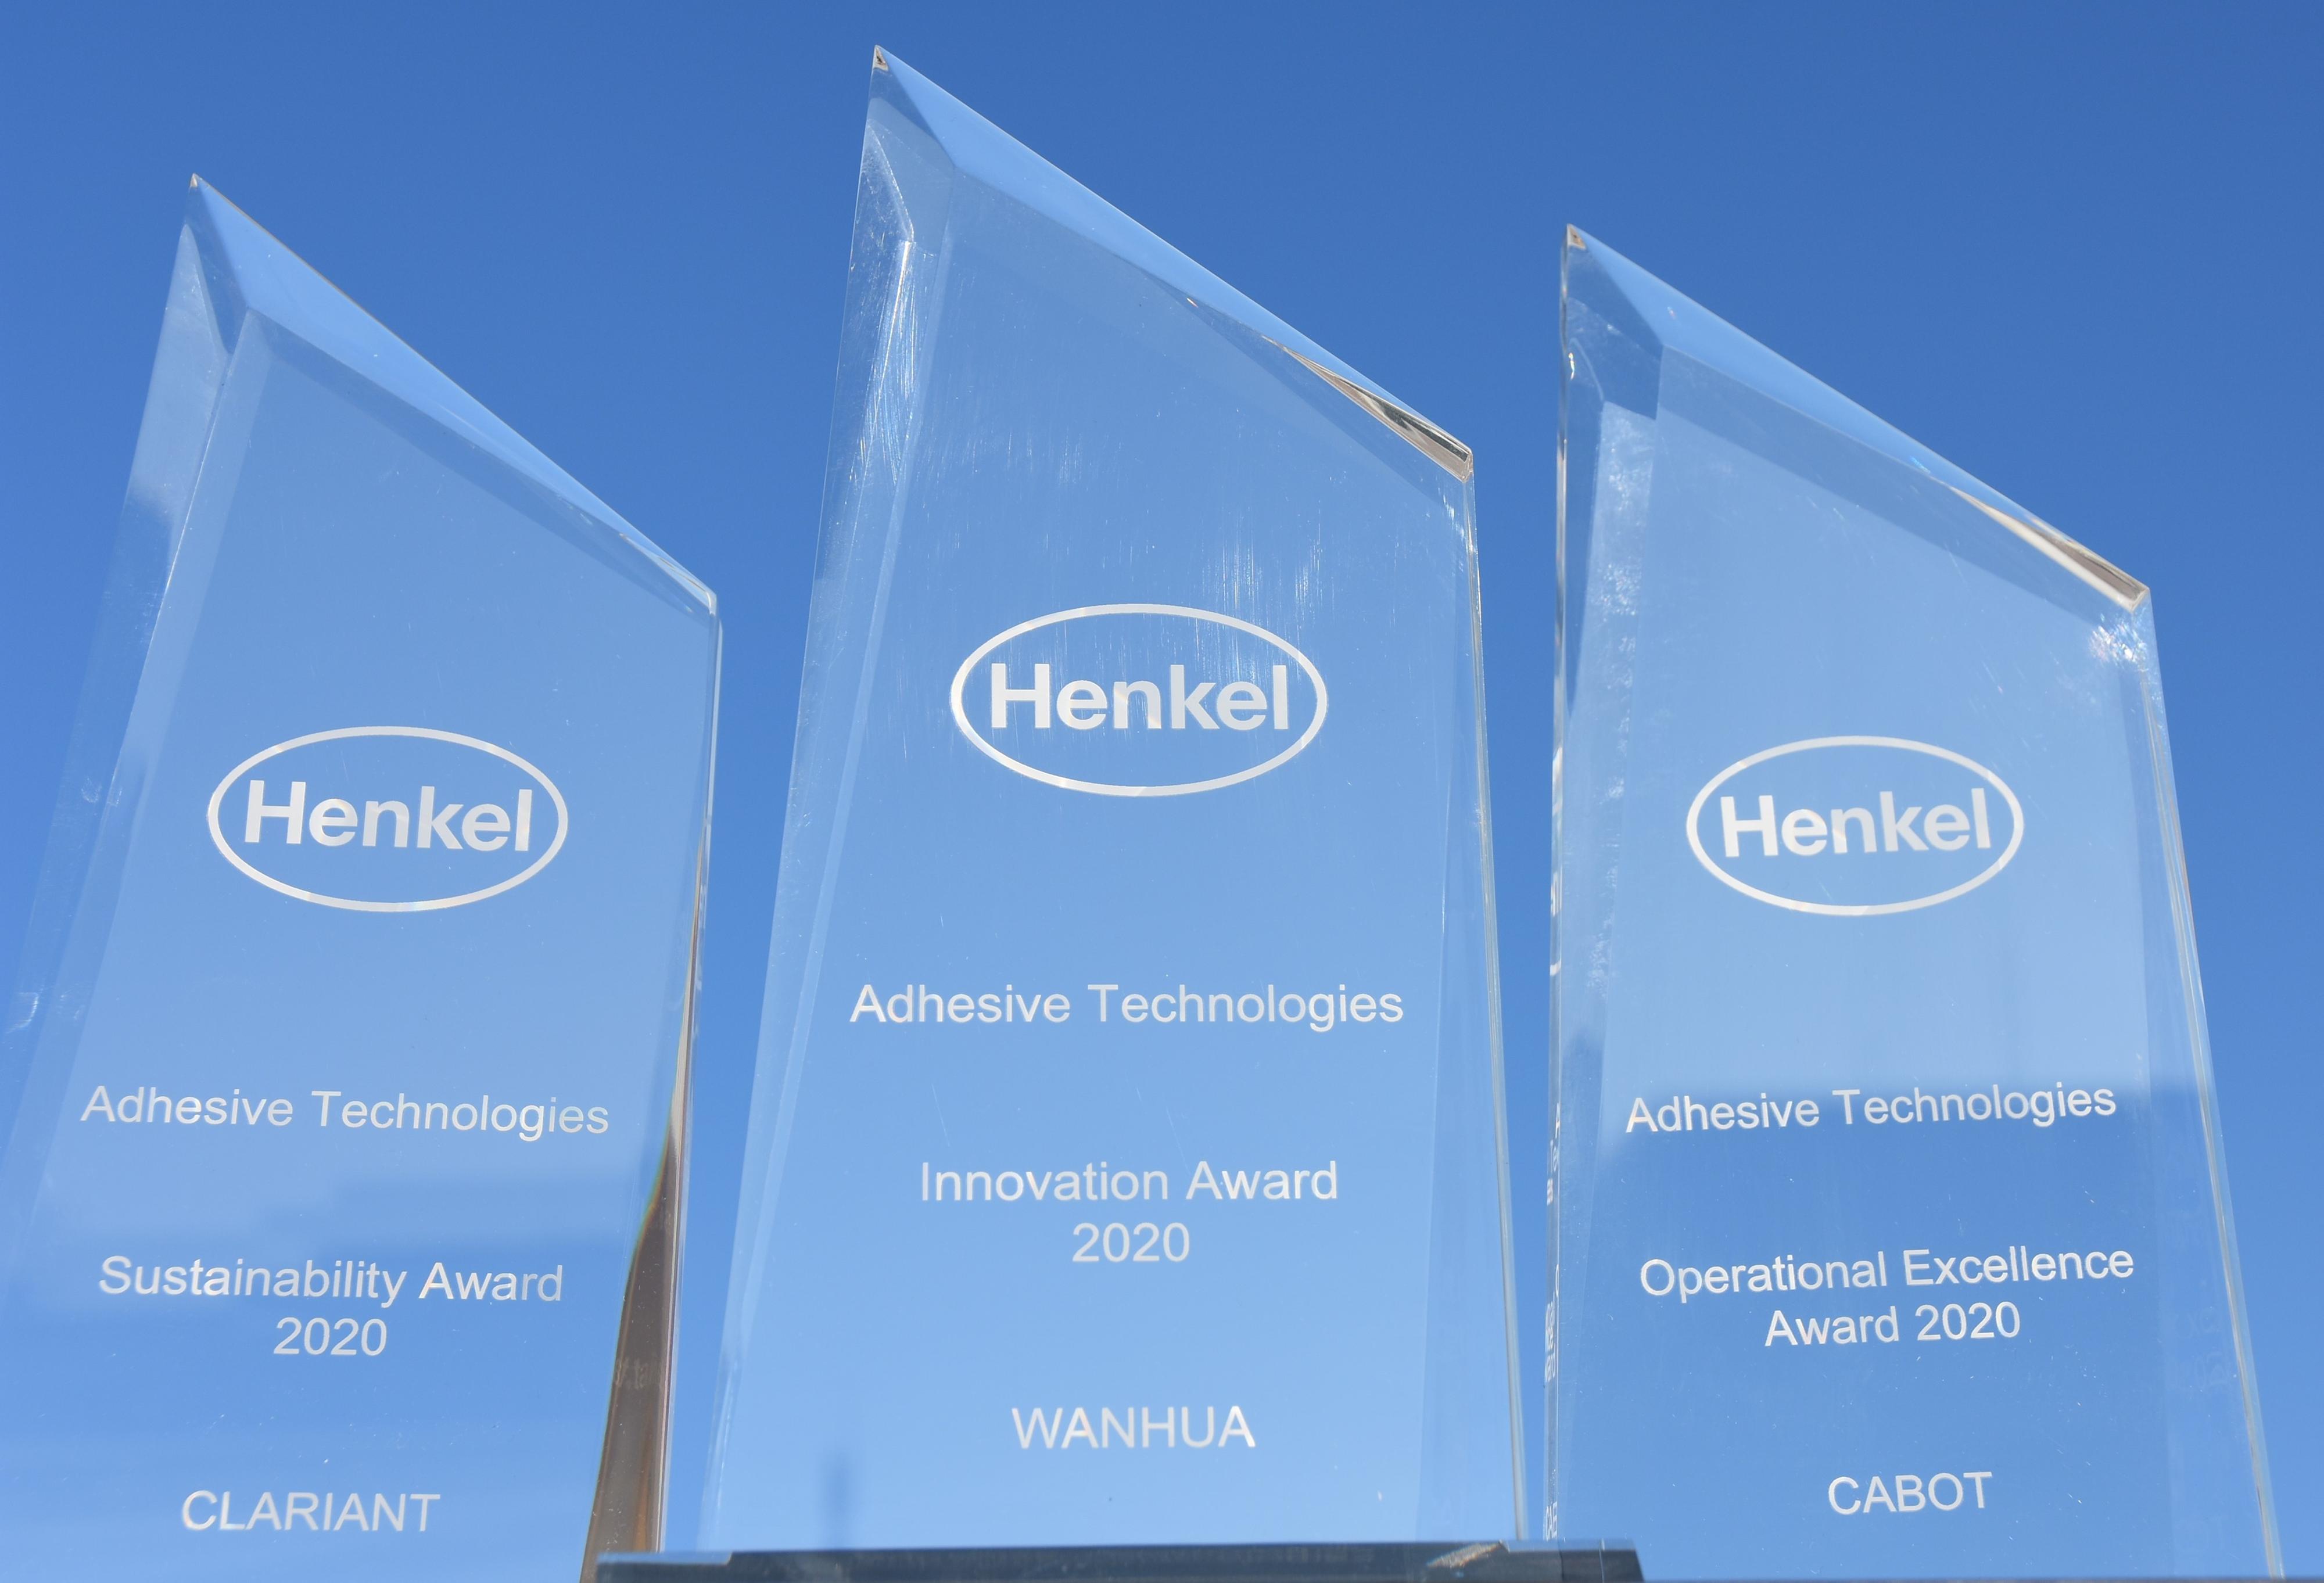 Clariant's commitment to innovation and sustainability recognized with Henkel and ICIS awards. 
(...